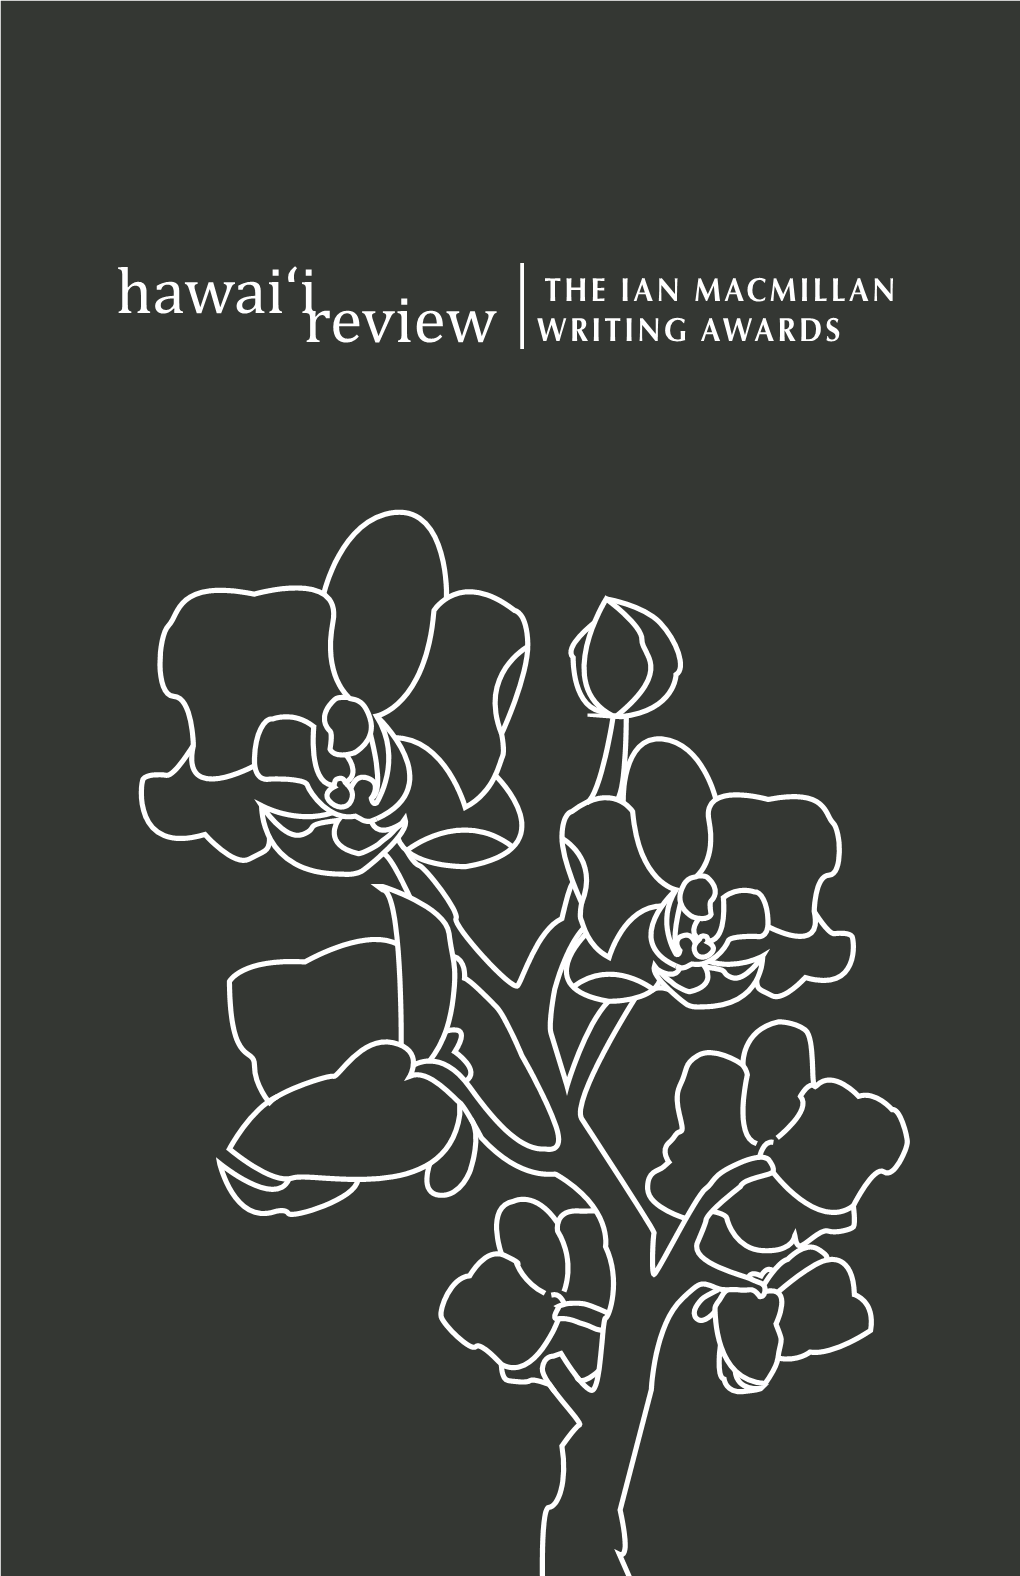 Hawaiʻi Review Is a Publication of the Student Media Board of the University of Hawaiʻi at Mānoa